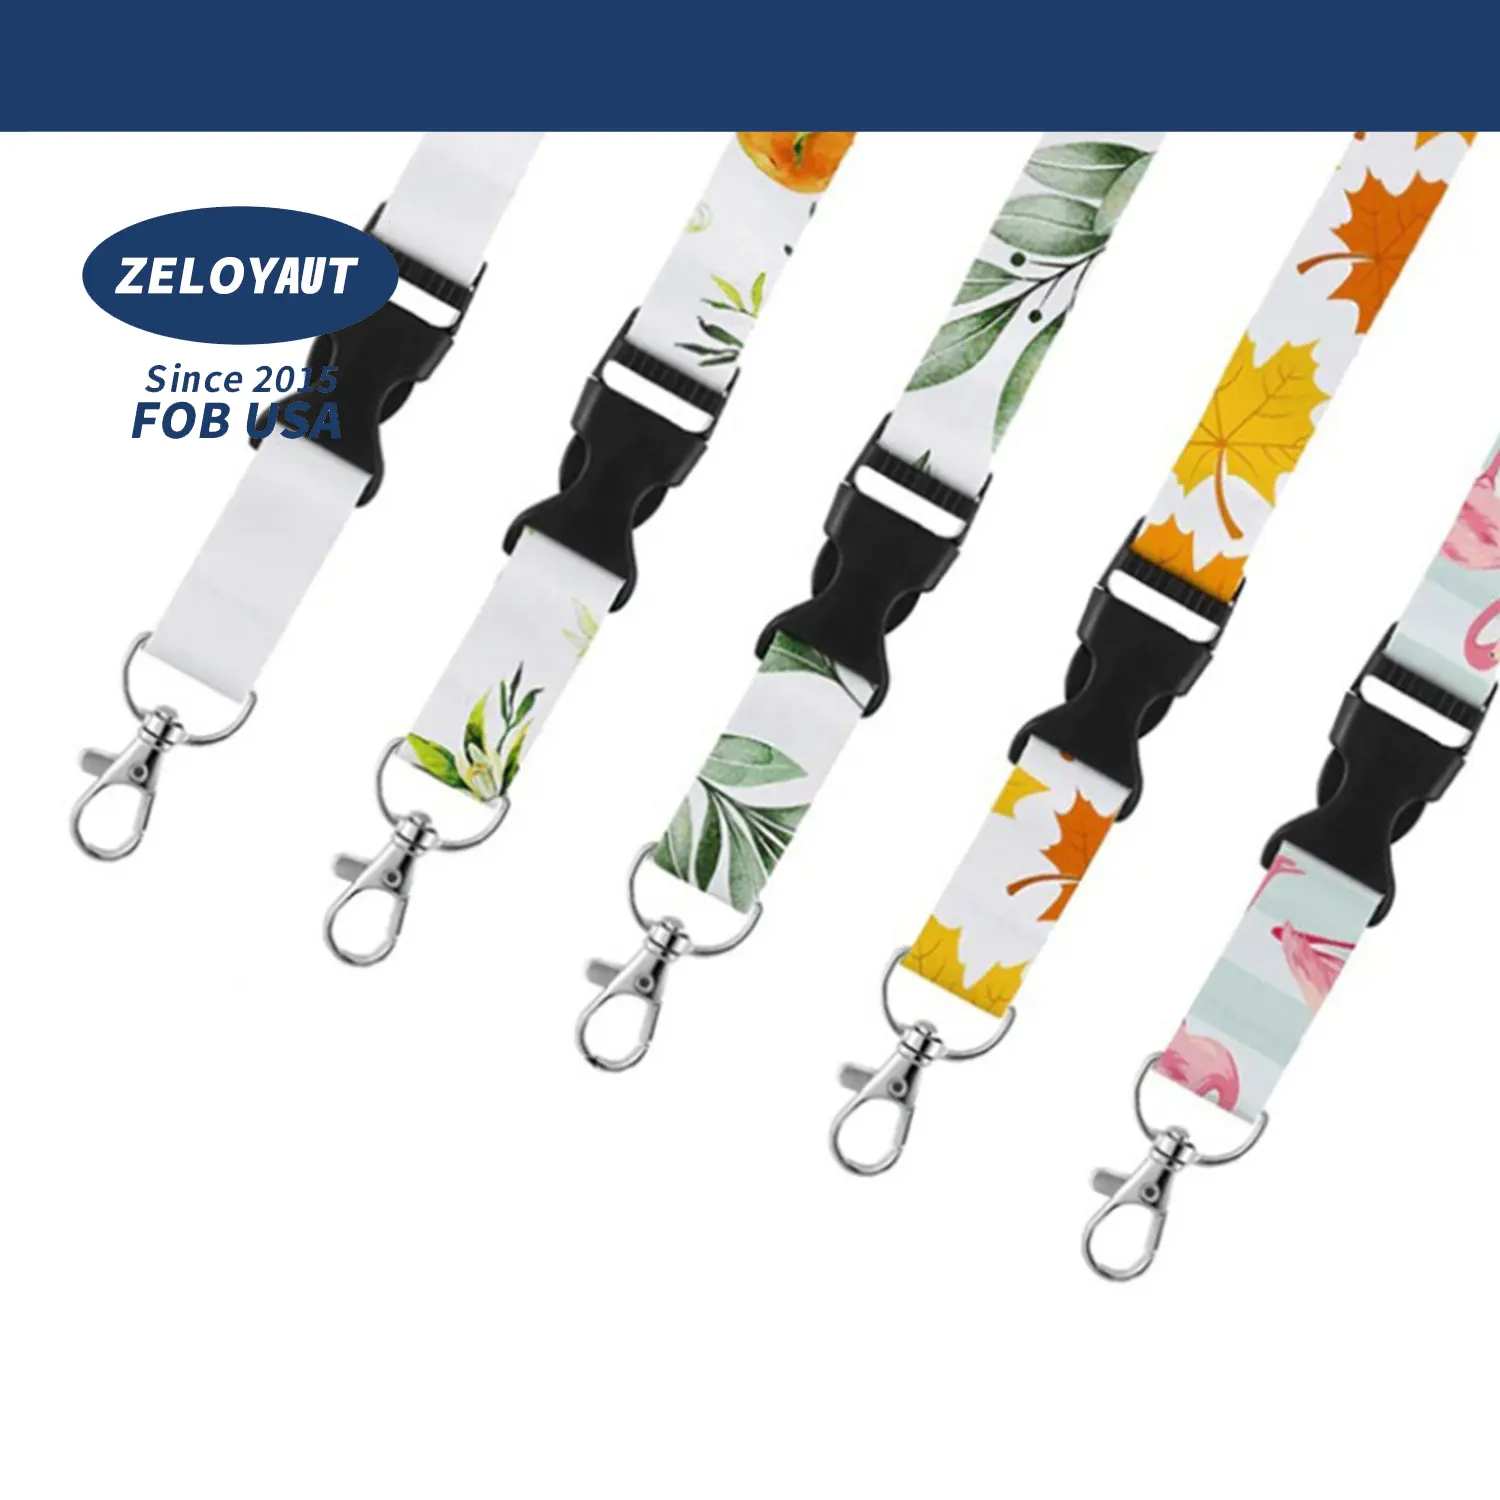 ZELOYAUT Sublimation breakaway lanyards with safety switch cheap custom printed low shipping cost high quality polyester